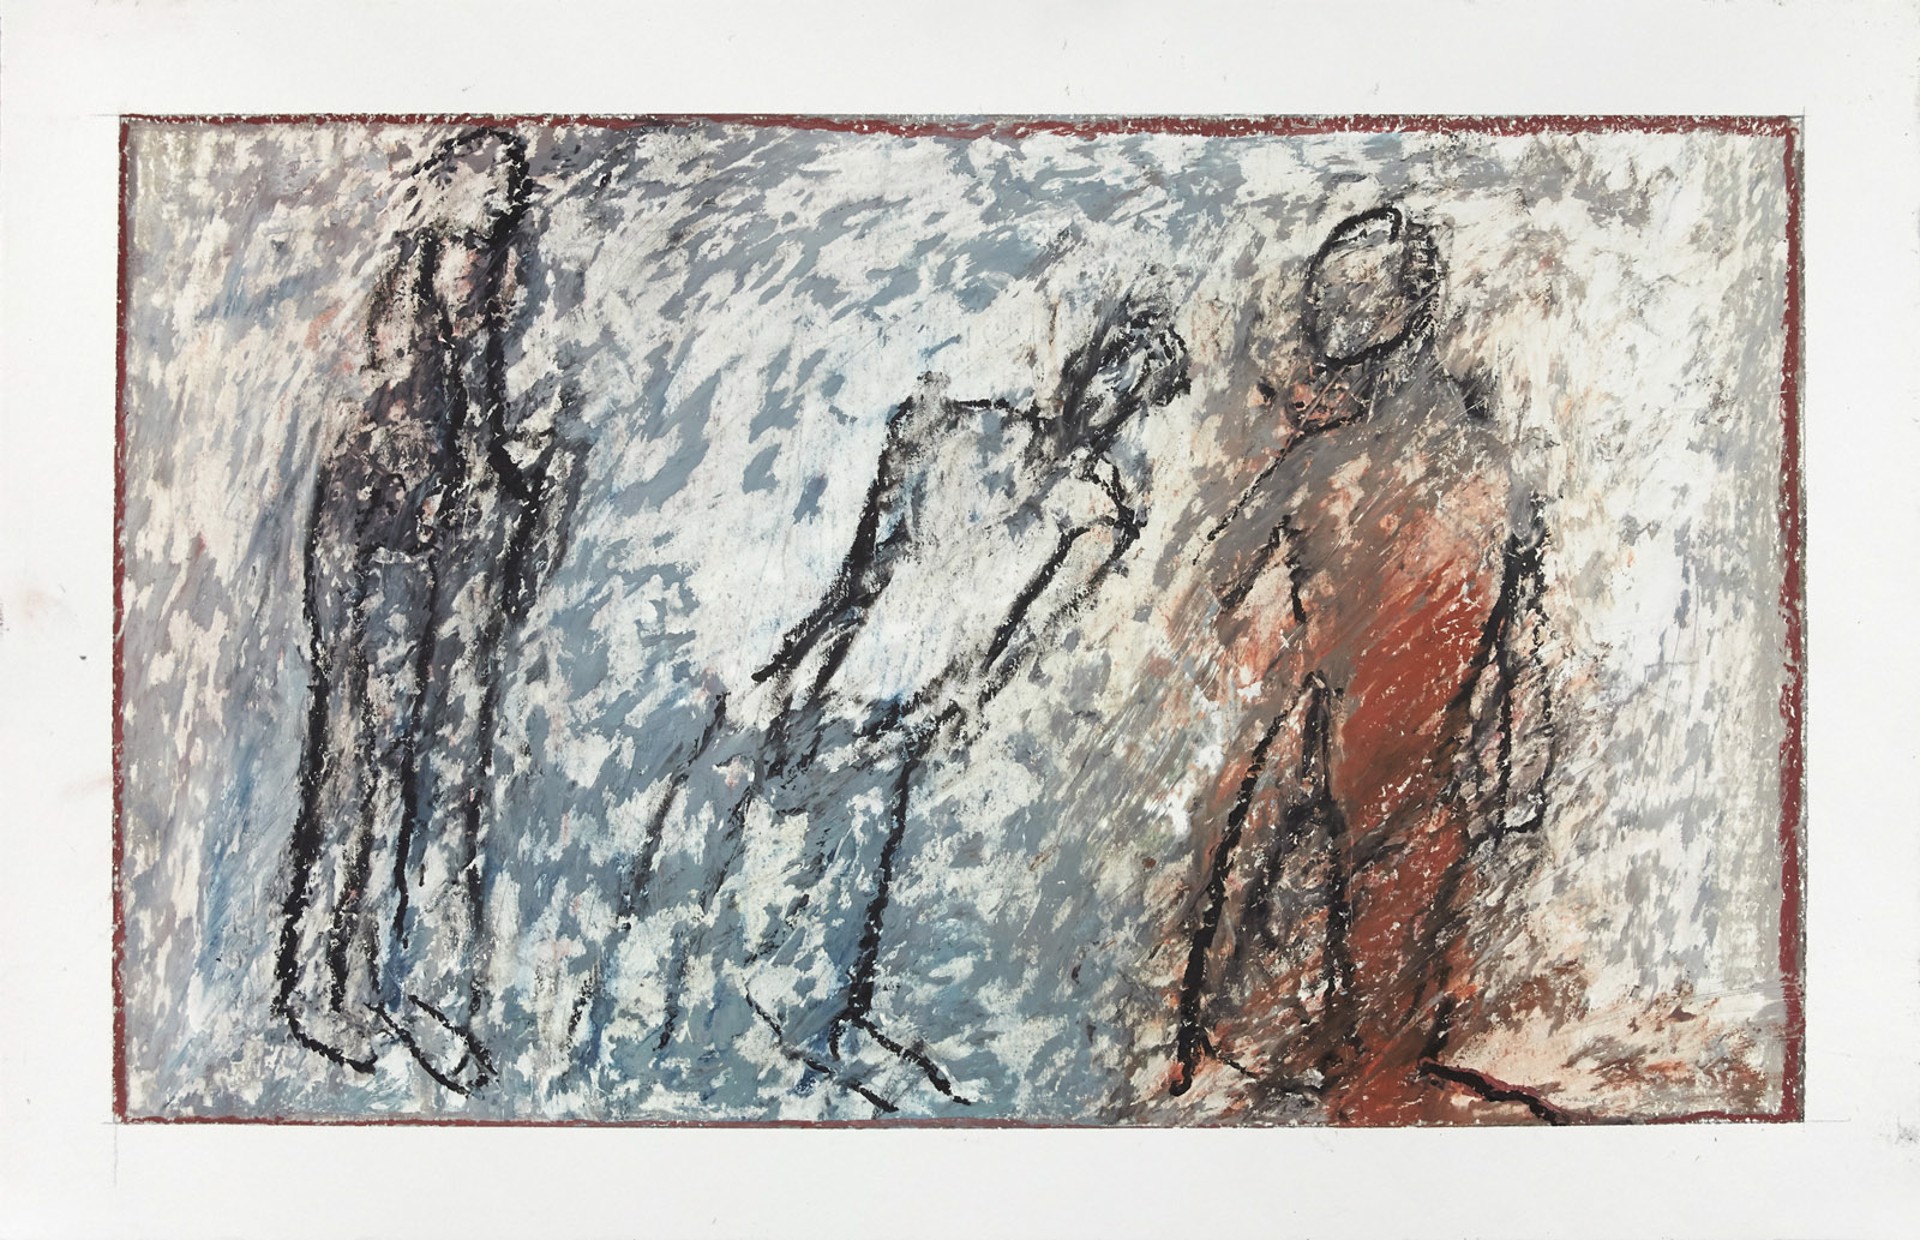 Drawings from Mt Gretna: Three Standing Figures by Thaddeus Radell